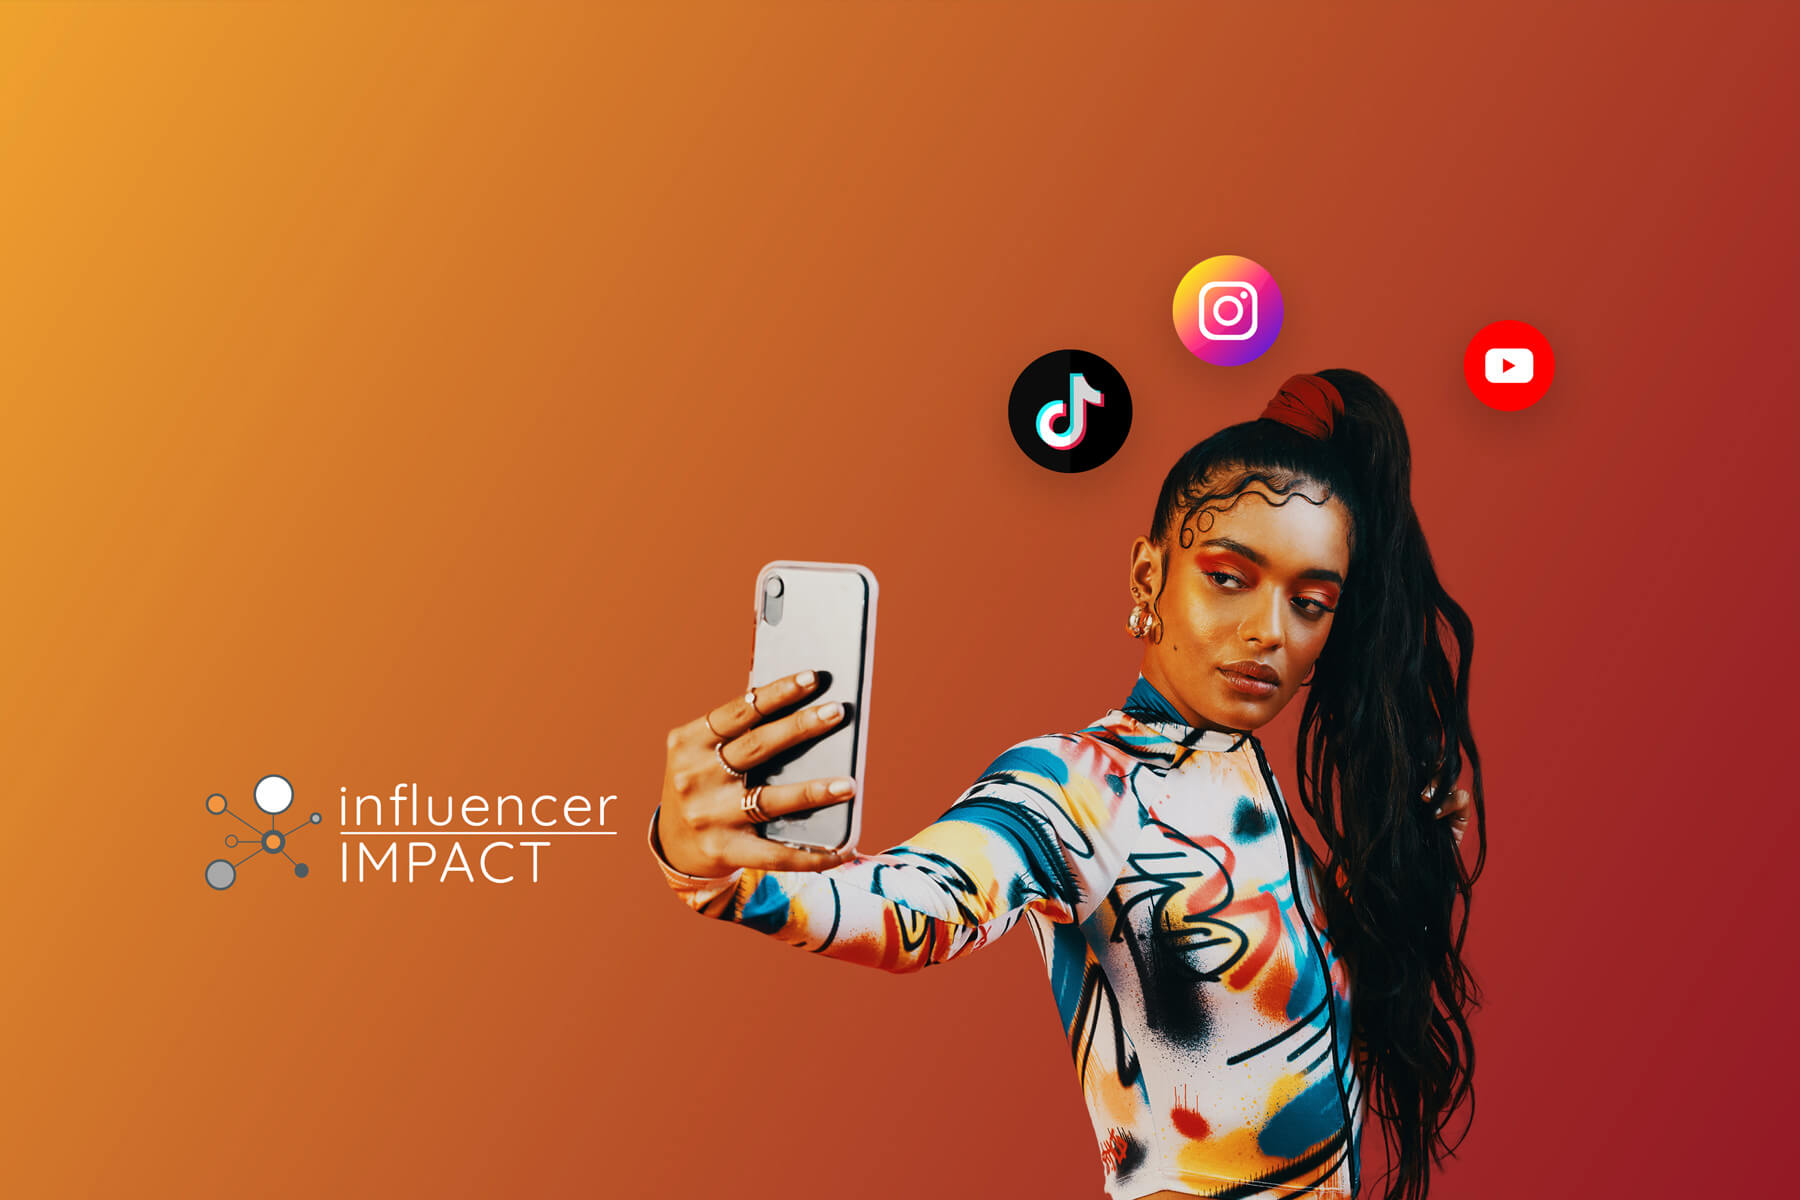 Achoo and influencerCONNECT join forces to become: influencerIMPACT